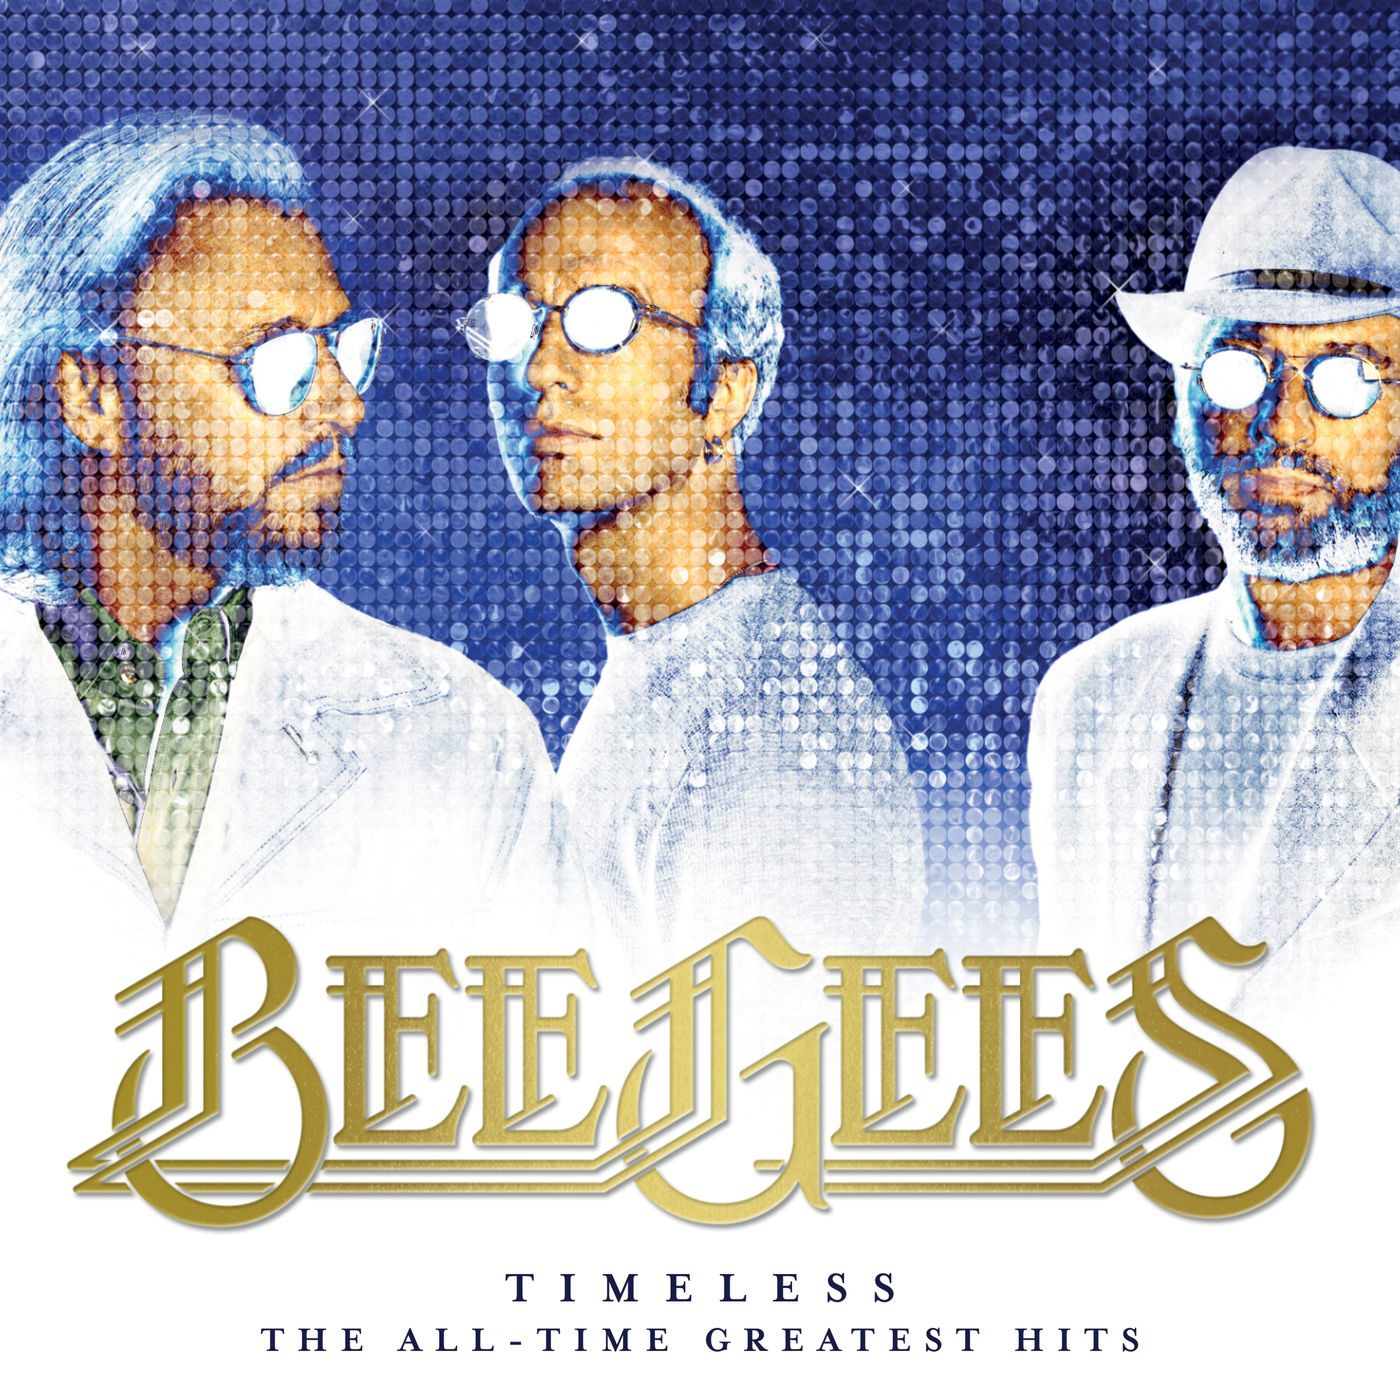 Bee Gees – Timeless – The All-Time Greatest Hits (2017/2021) [FLAC 24bit/96kHz]